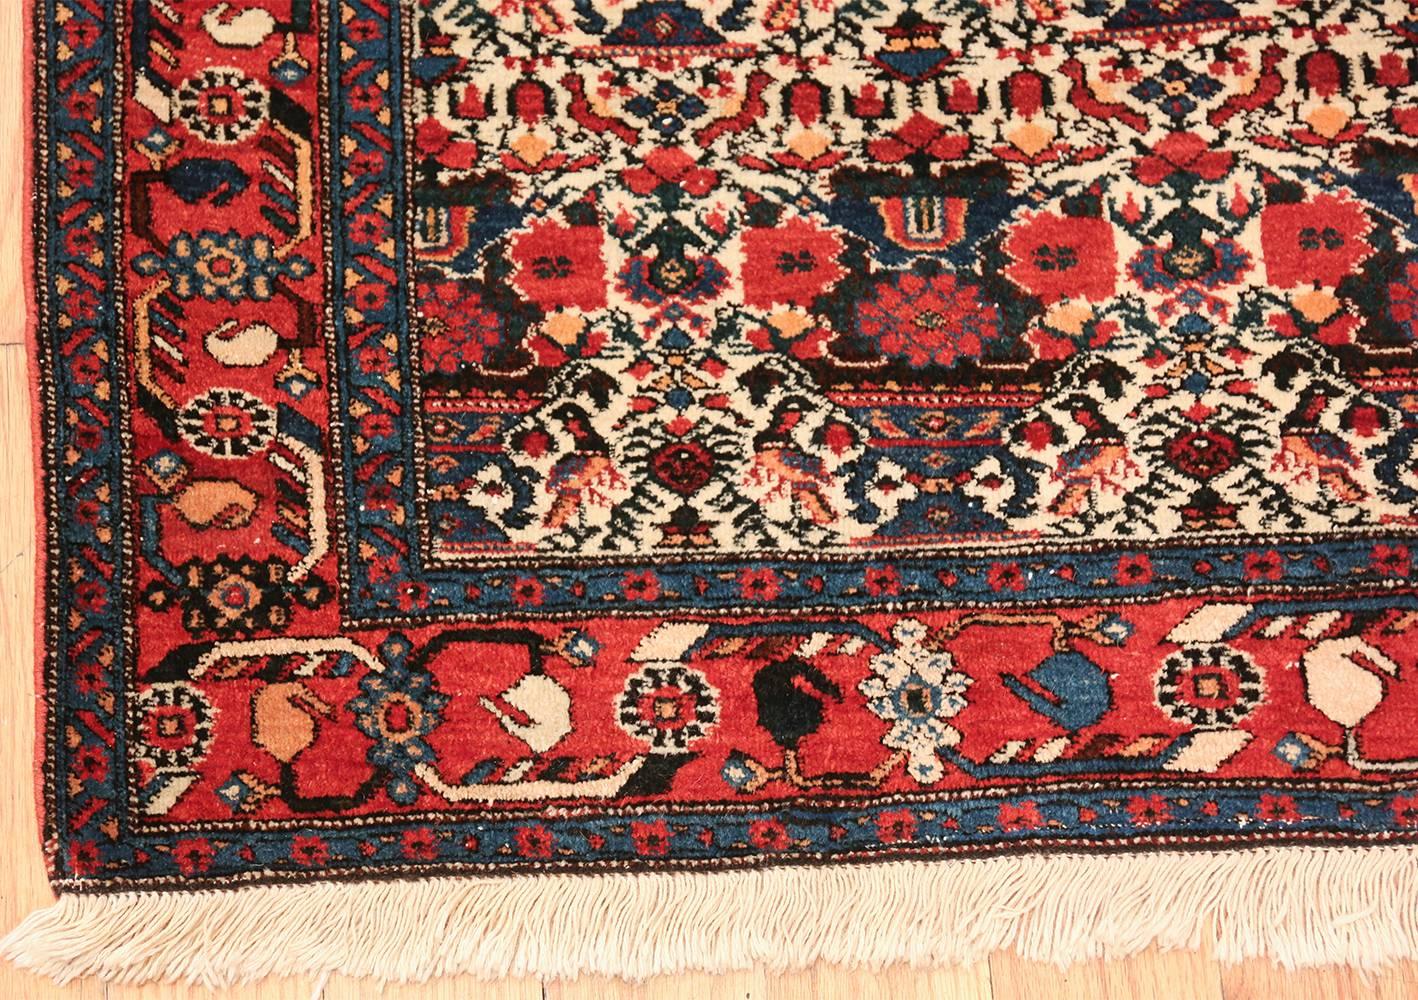 Beautiful Small Size and Ivory Background Colored Vintage Persian Sarouk Farahan Rug, Country of Origin / Rug Type: Vintage Persian Rug, Circa Date: Mid 20th Century. Size: 5 ft 1 in x 7 ft 9 in (1.55 m x 2.36 m).